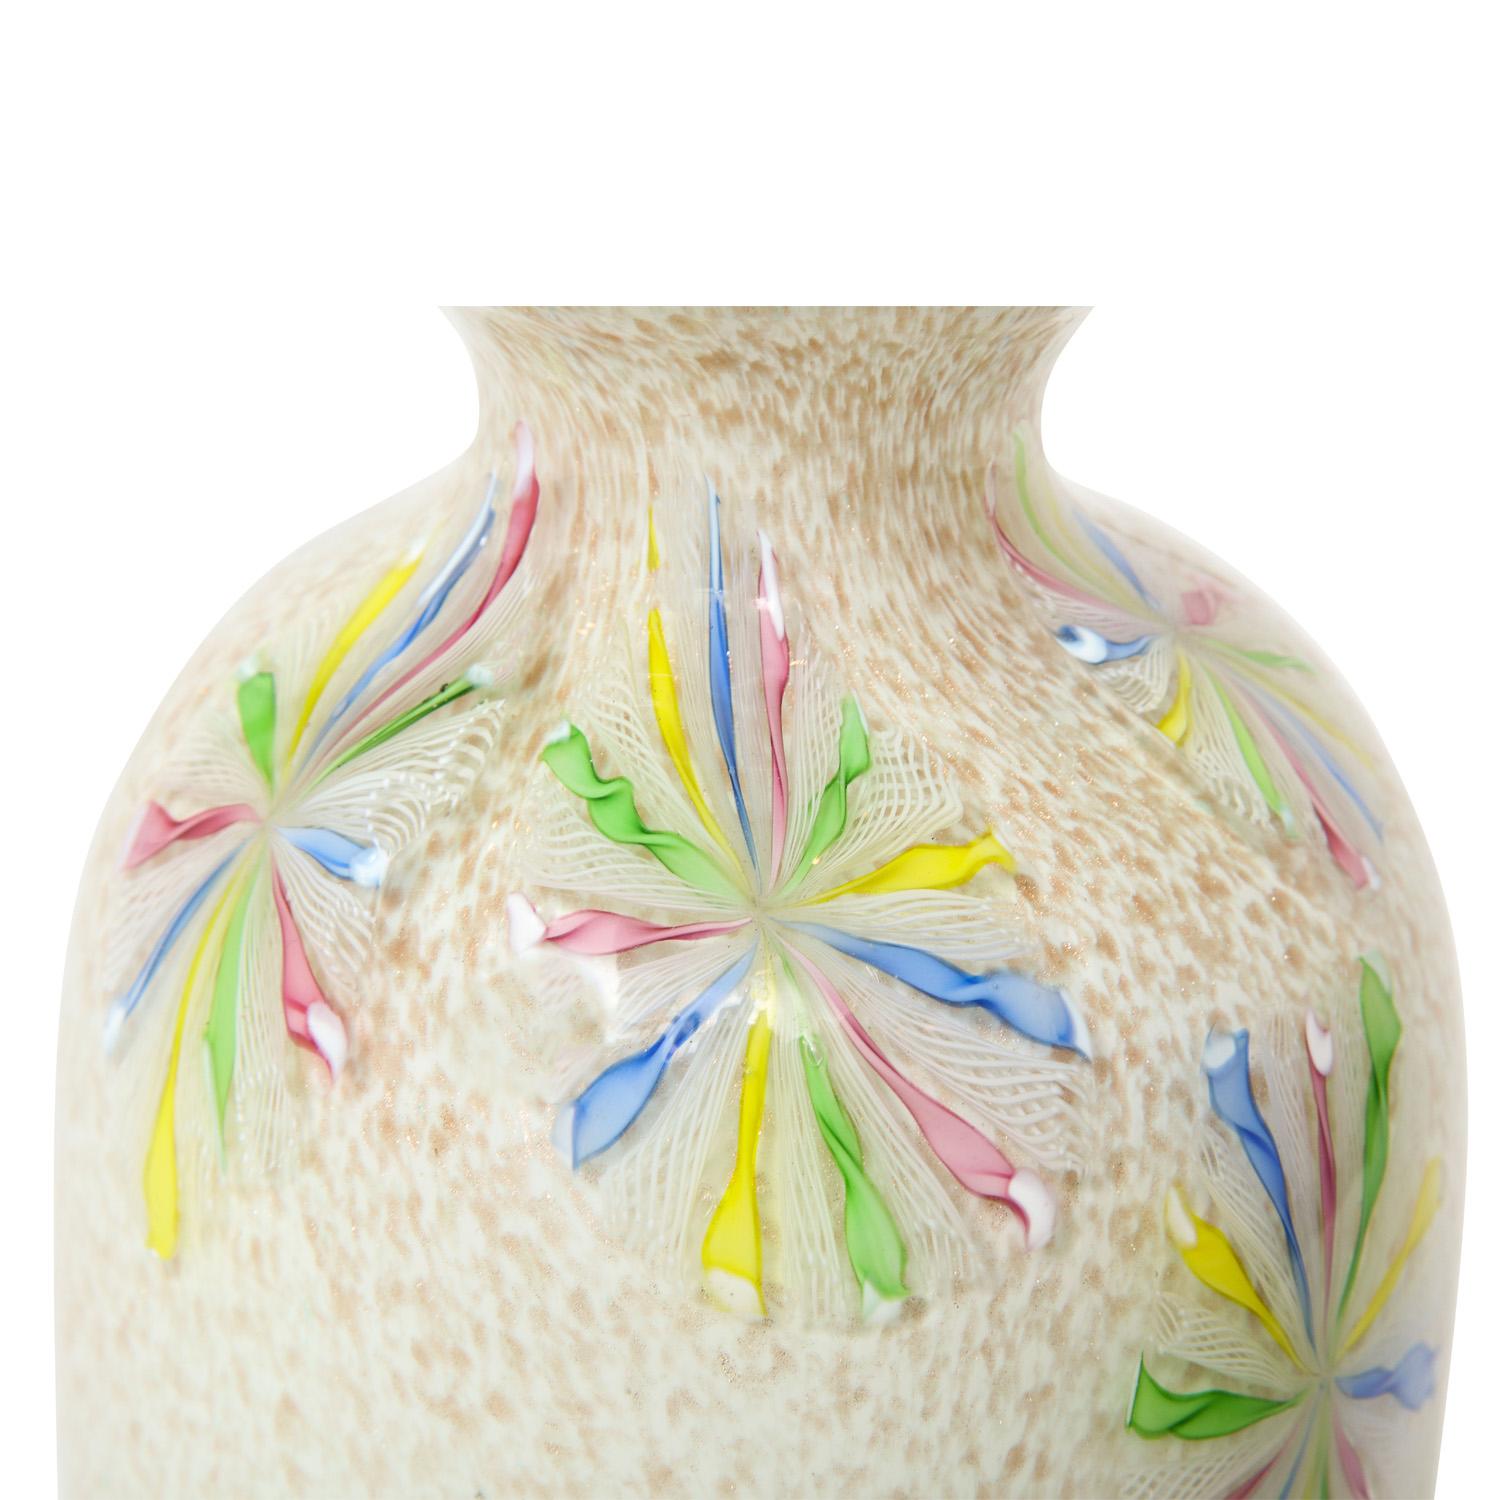 Mid-Century Modern A.V.E.M. Hand Blown Glass Vase with Colorful Starburst Murrhines, 1950s For Sale